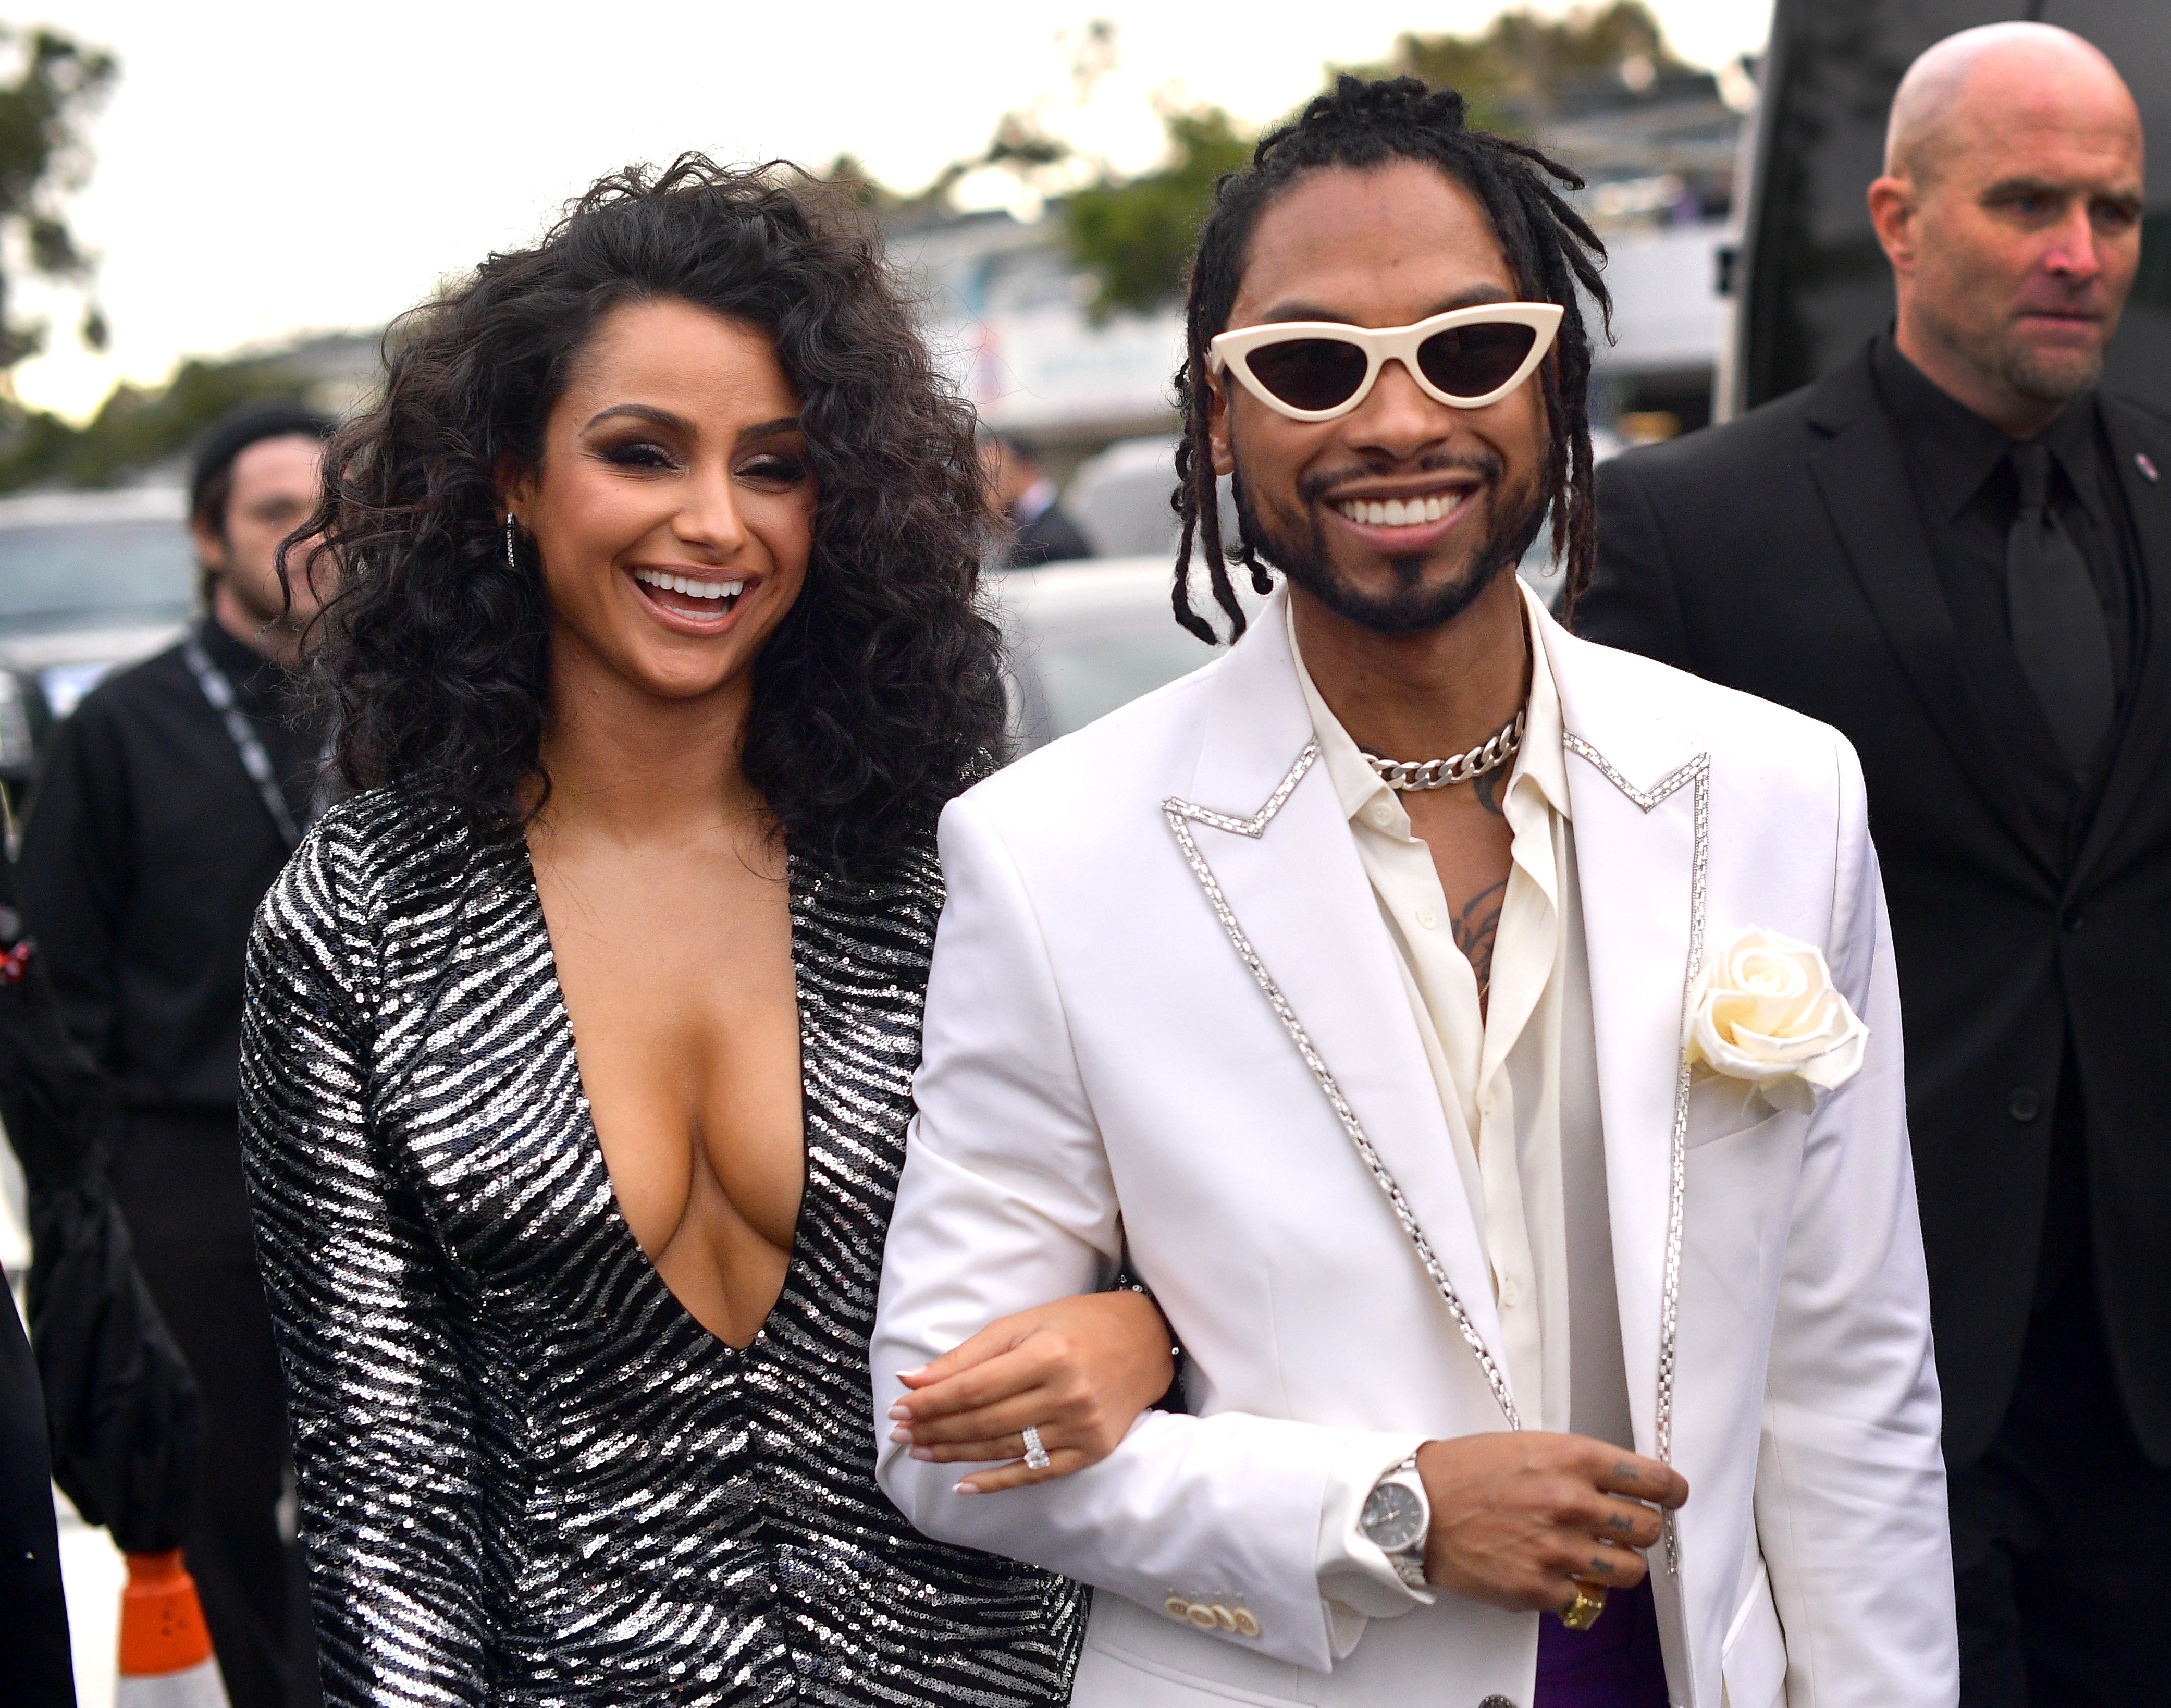 Miguel and Nazanin Mandi arrive at the 61st Annual GRAMMY Awards on February 10, 2019 in Los Angeles, California. | Photo by Matt Winkelmeyer/Getty Images